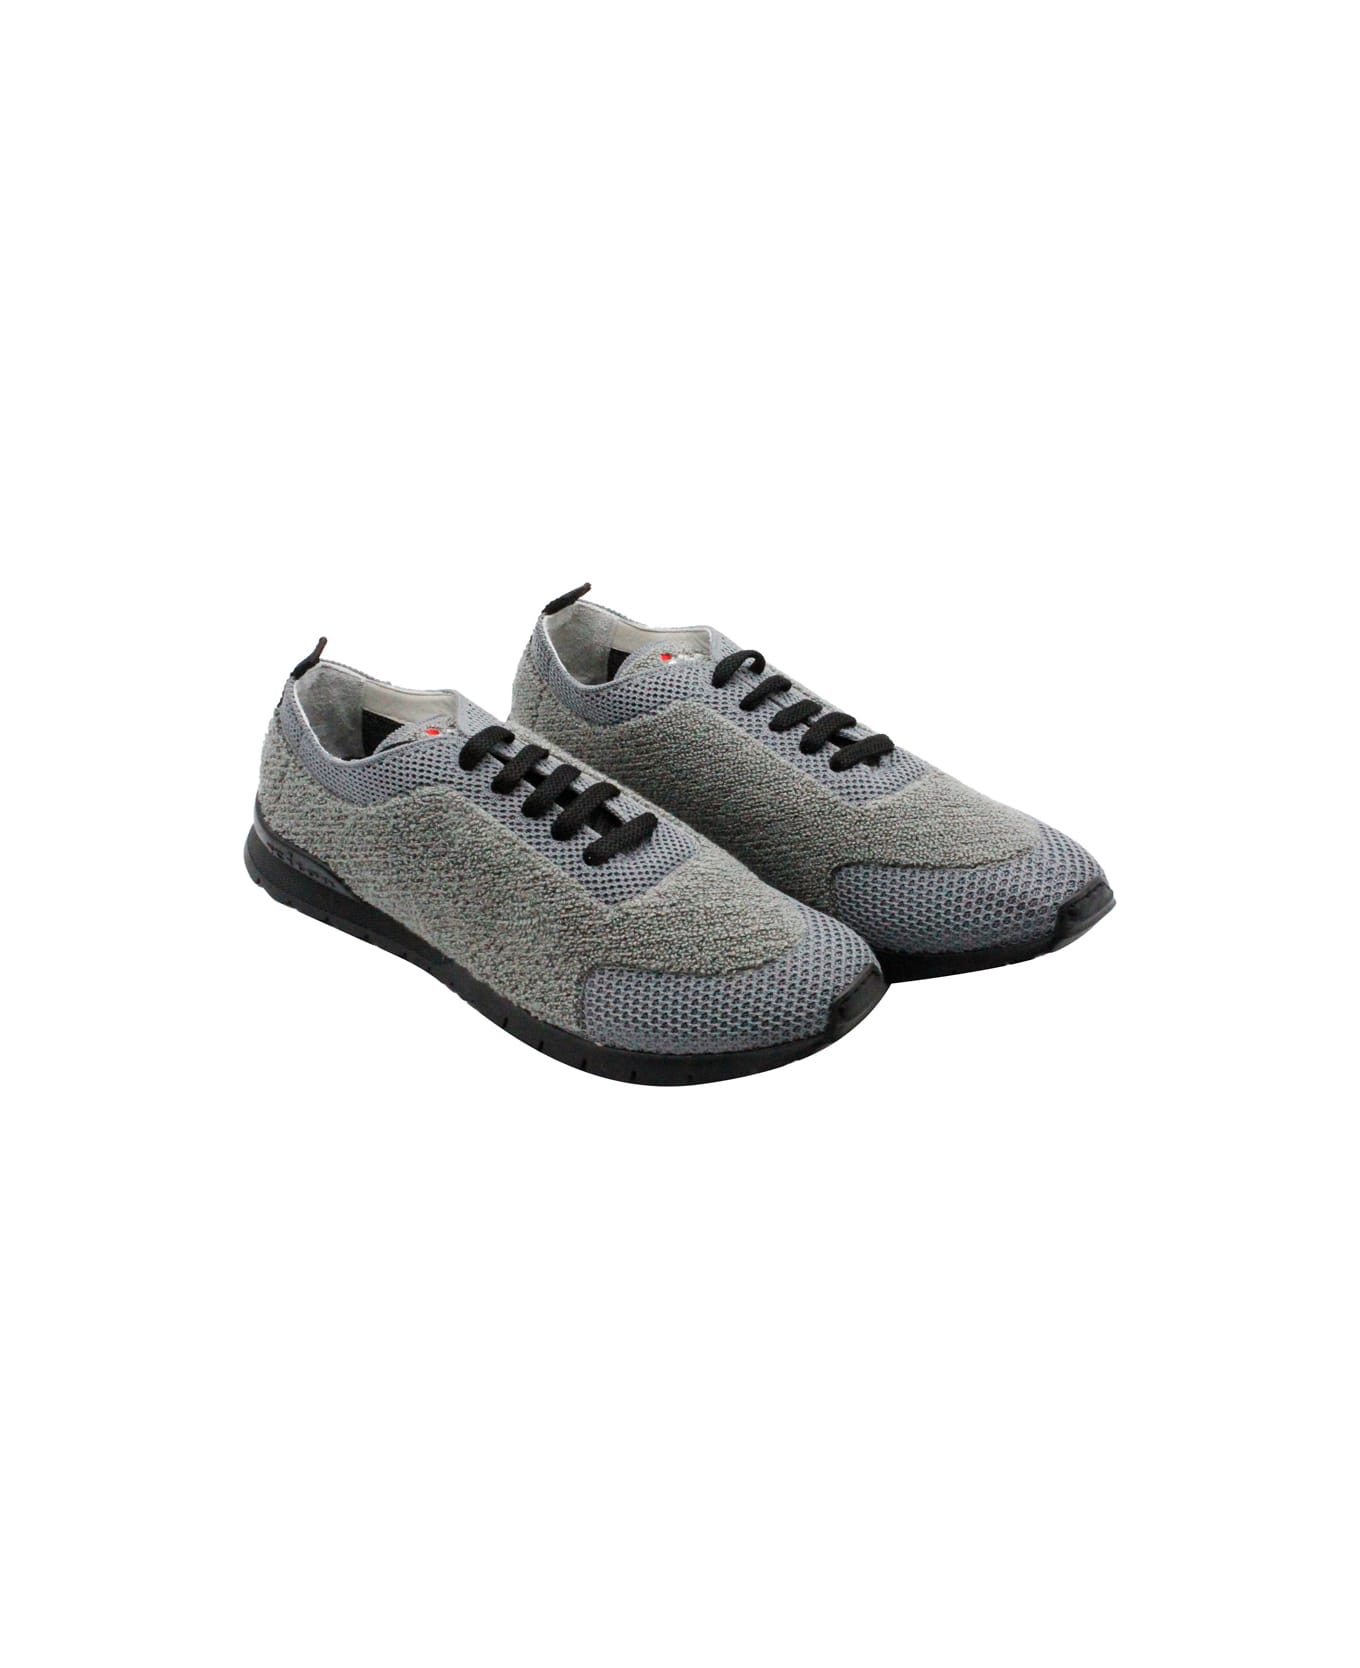 Kiton Sneaker Shoe Made Of Knit Fabric. The Bottom, With A Black Sole, Is Flexible And Extra Light; The Elastic Tongue Ensures Greater Comfort. Logo - Grey